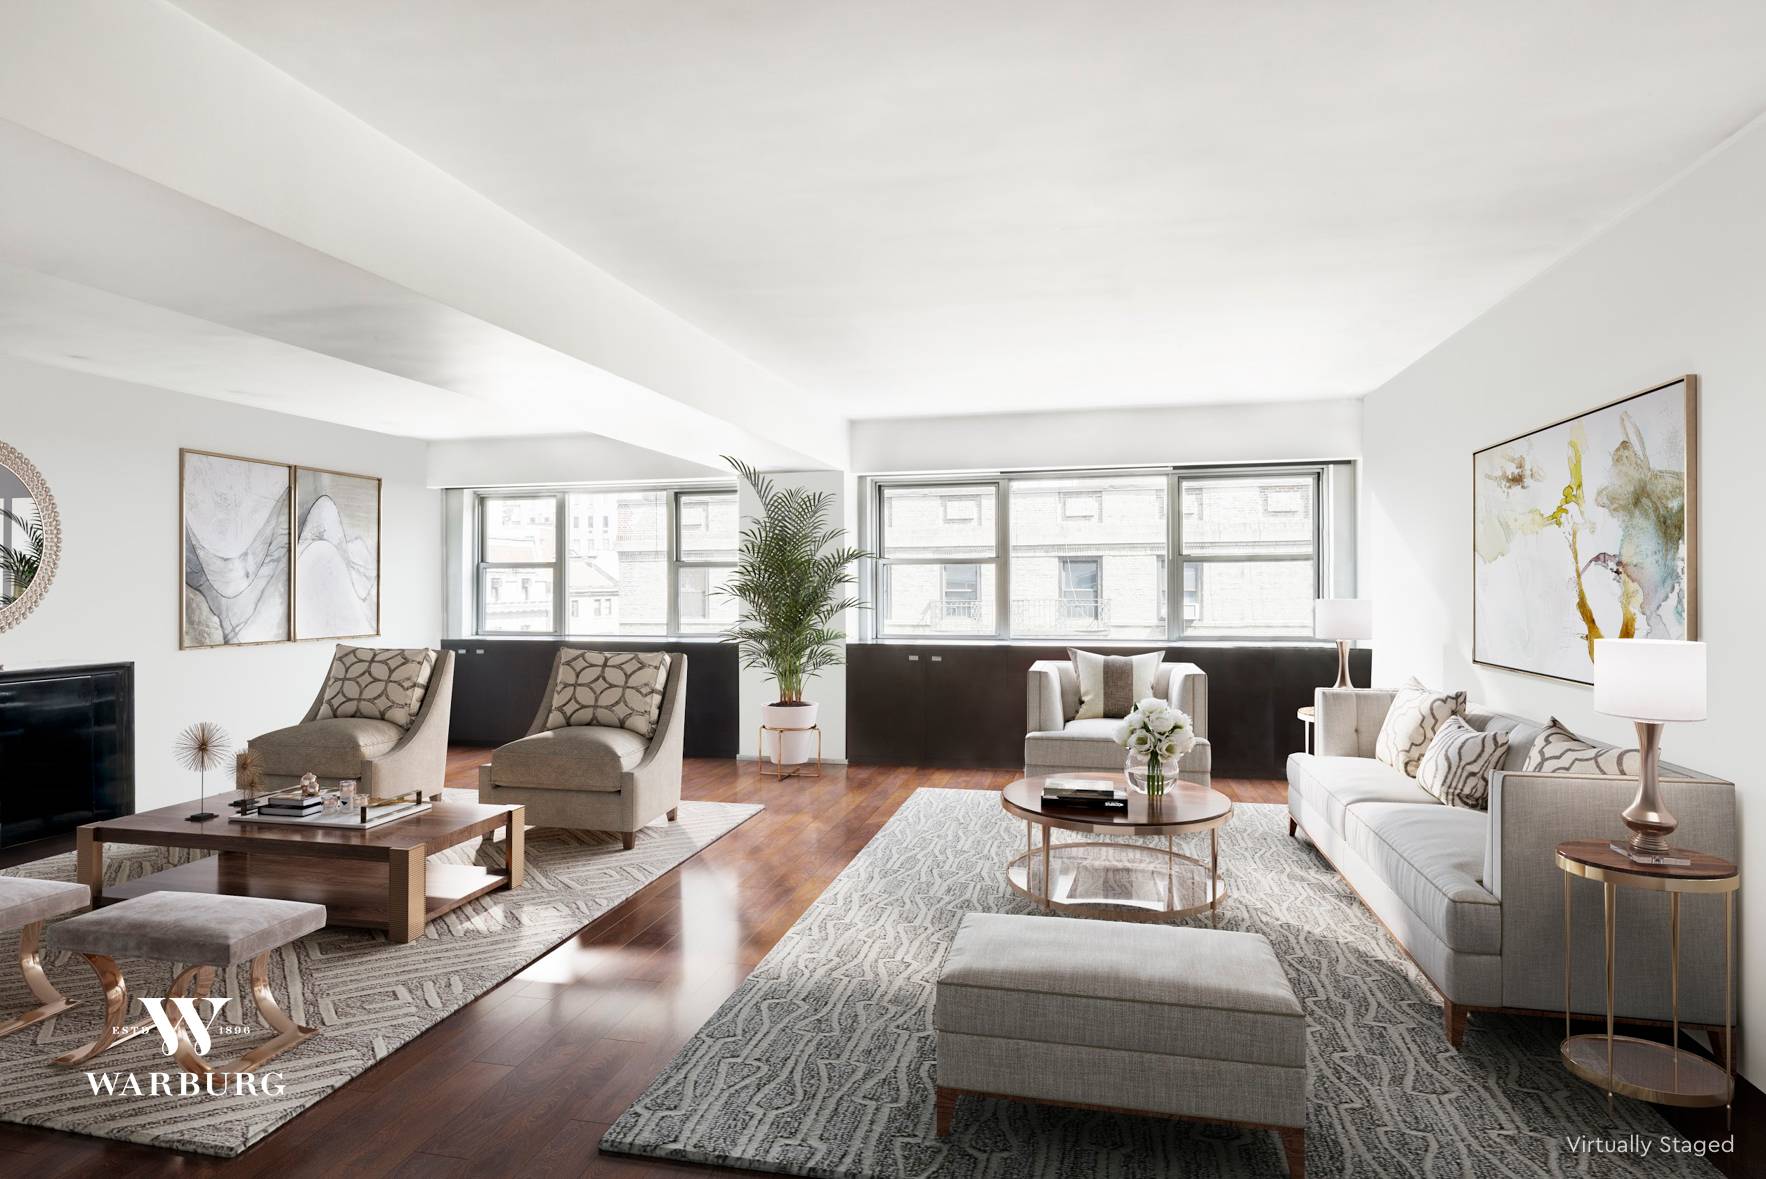 Renovated with the utmost attention to detail by famed Italian designer Leopoldo Rosati featured in Architectural Digest, the most discerning buyers will quickly fall in love with this Upper Eastside ...